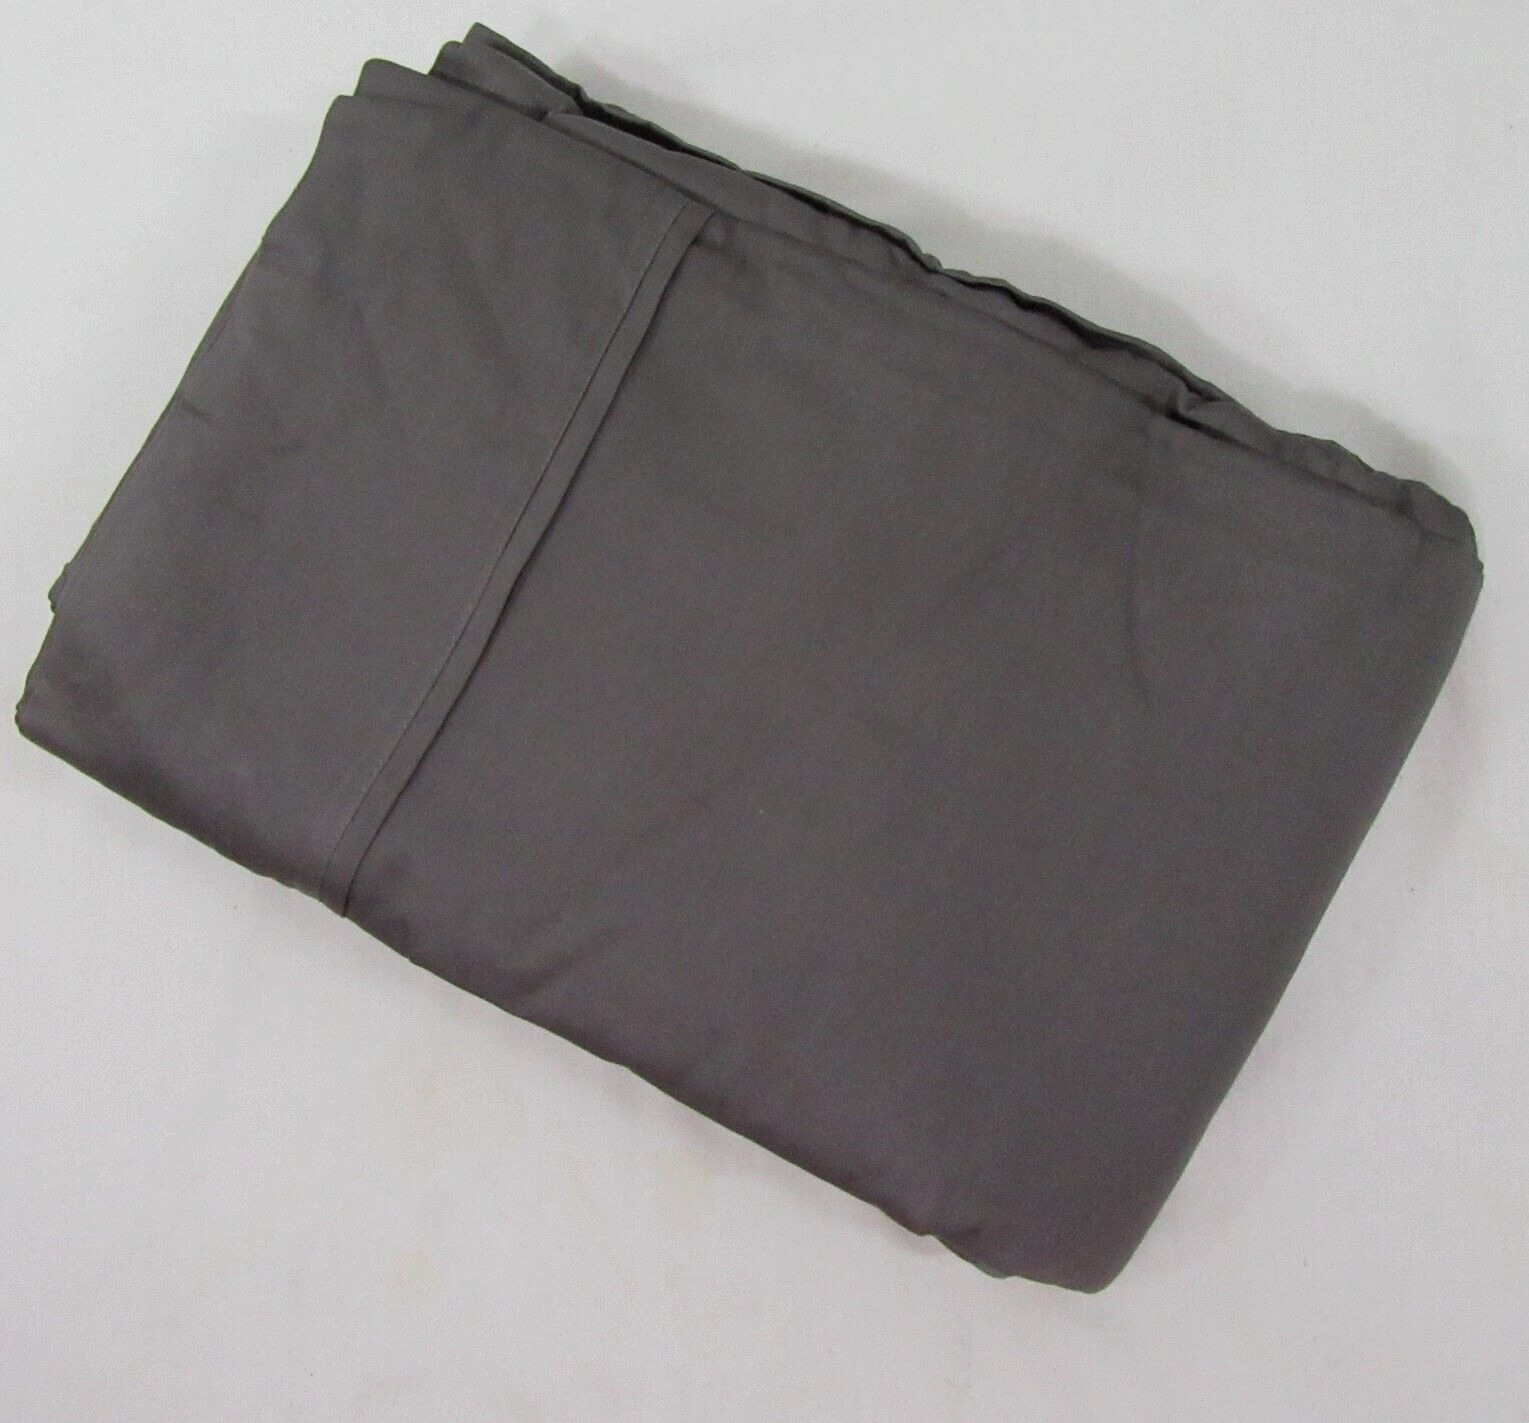 DKNY Solid Pewter Grey Cotton King Flat Sheet - $38.00